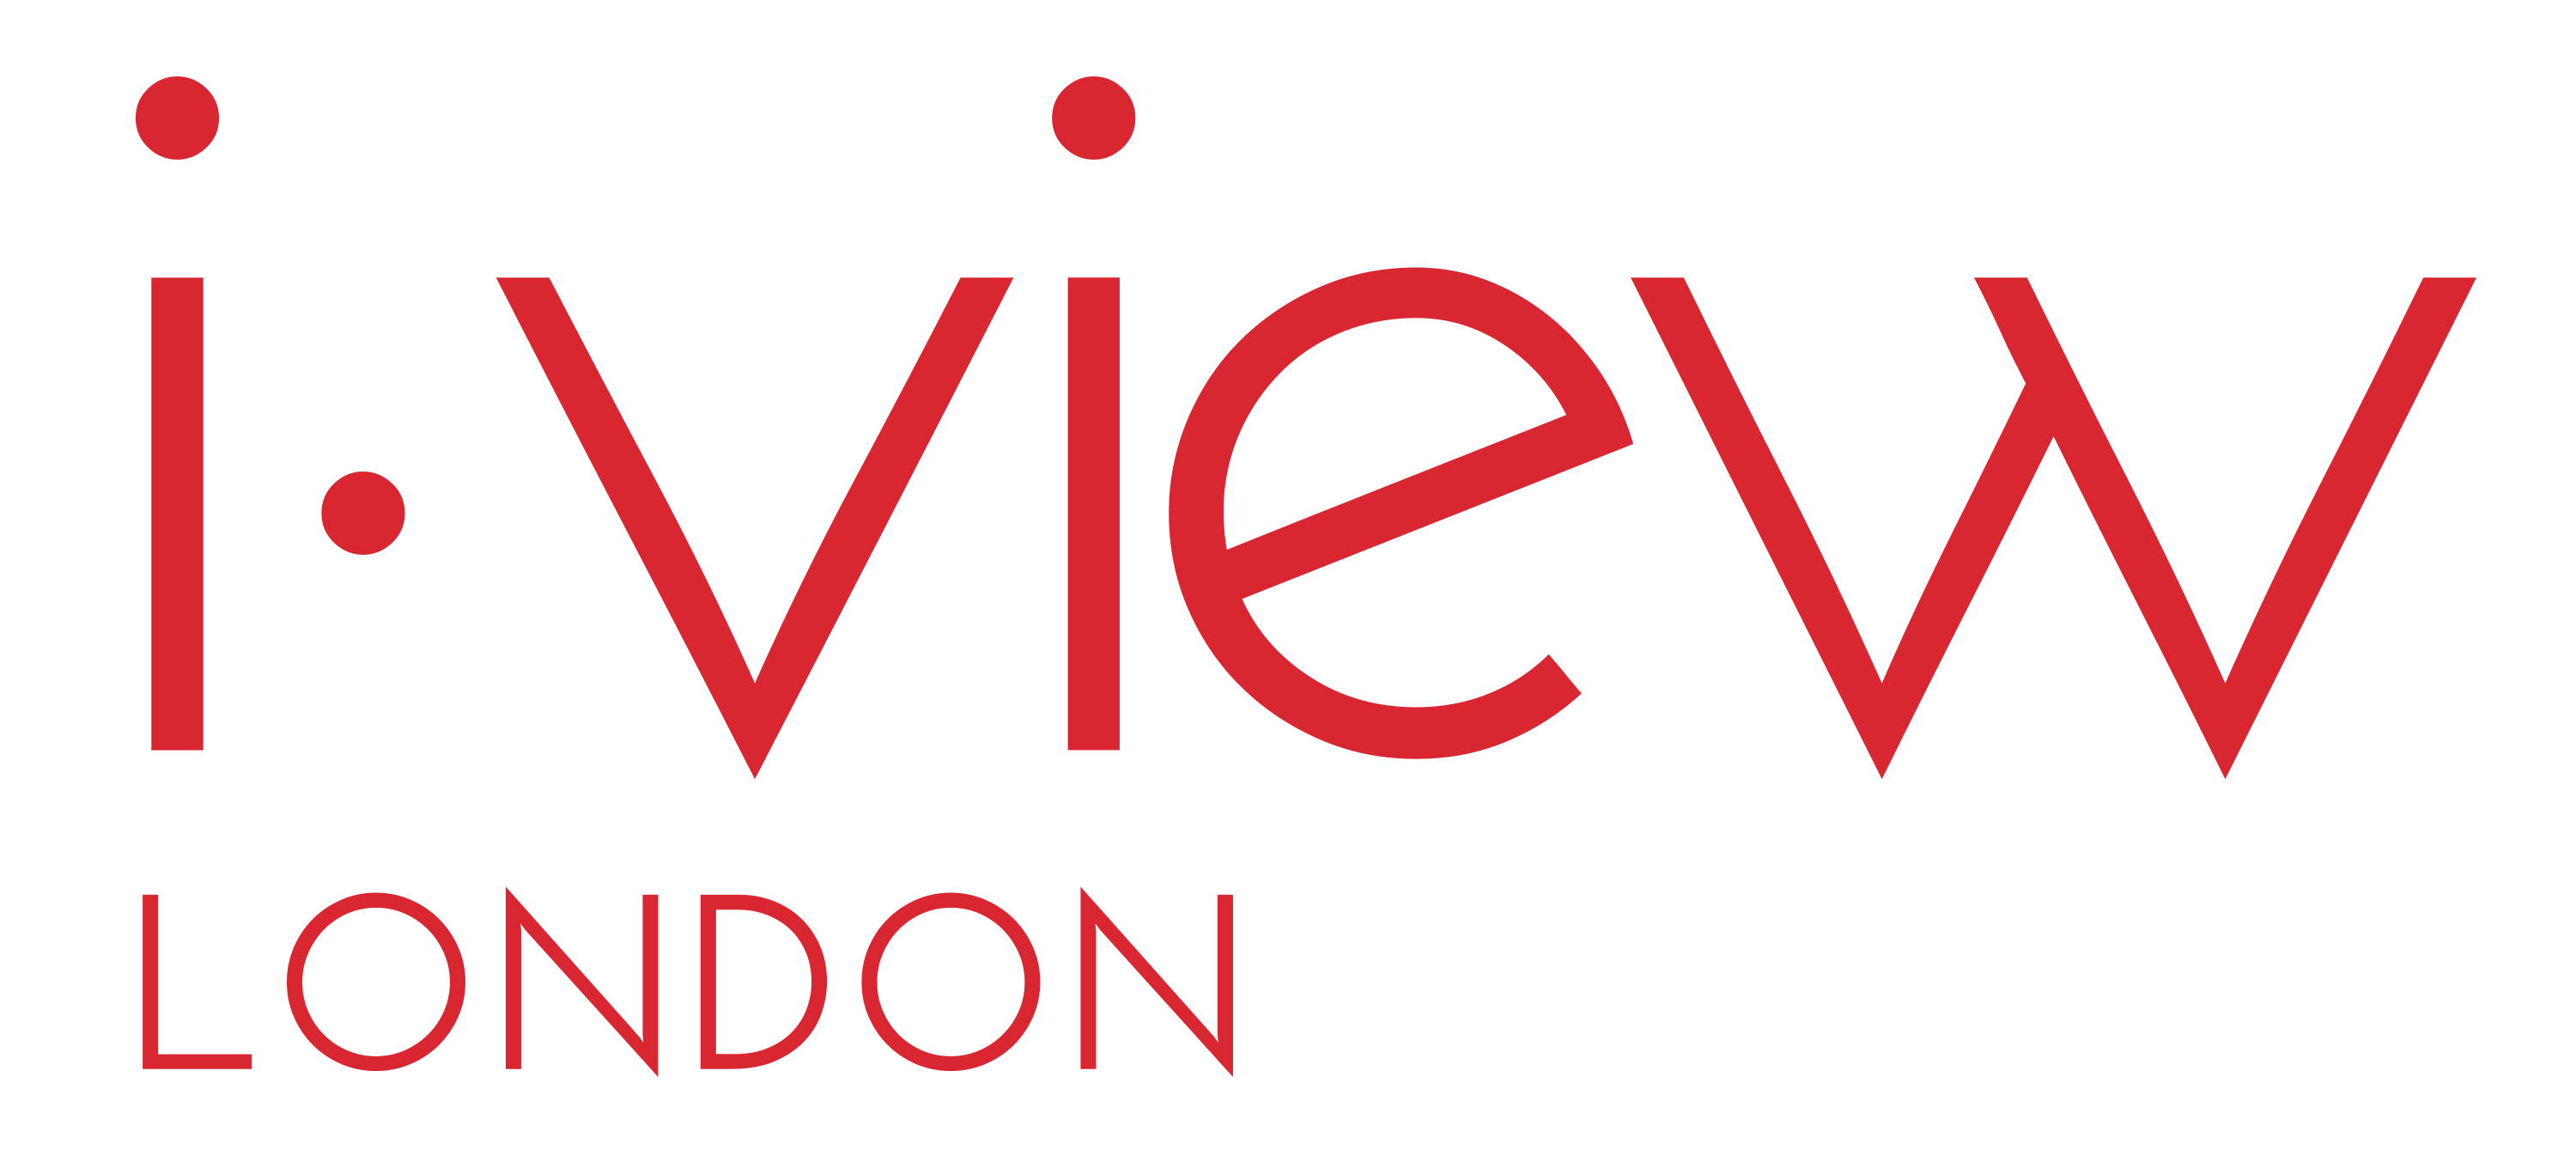 I-view-london_red